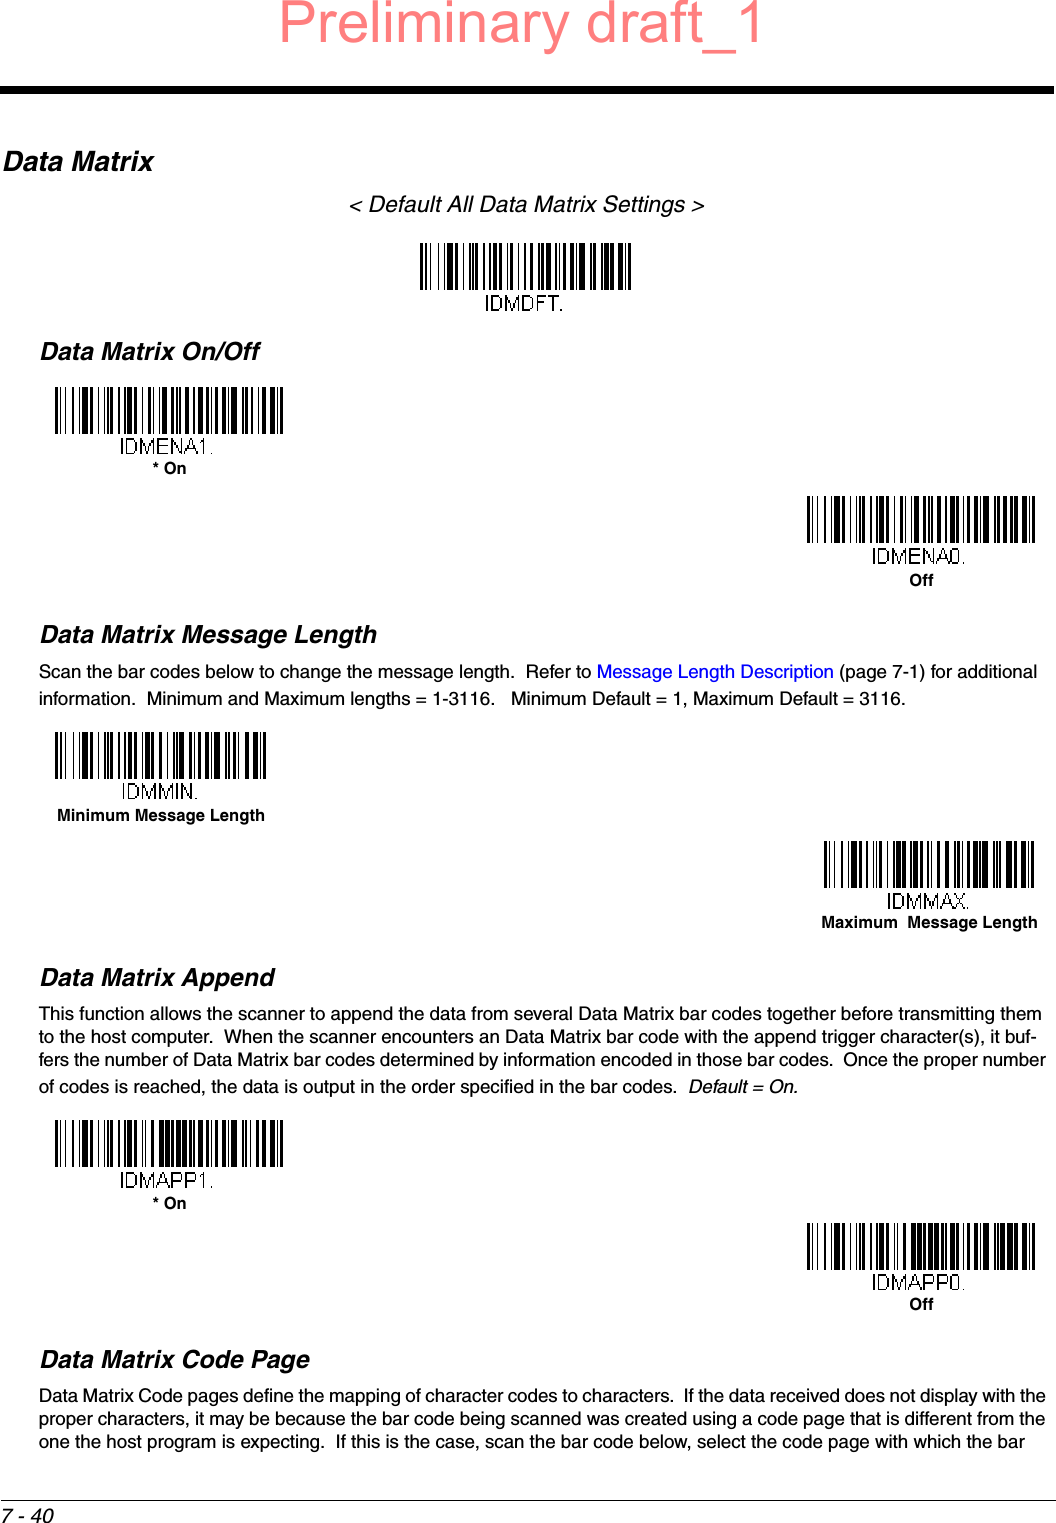 7 - 40Data Matrix&lt; Default All Data Matrix Settings &gt;Data Matrix On/OffData Matrix Message LengthScan the bar codes below to change the message length.  Refer to Message Length Description (page 7-1) for additional information.  Minimum and Maximum lengths = 1-3116.   Minimum Default = 1, Maximum Default = 3116.Data Matrix AppendThis function allows the scanner to append the data from several Data Matrix bar codes together before transmitting them to the host computer.  When the scanner encounters an Data Matrix bar code with the append trigger character(s), it buf-fers the number of Data Matrix bar codes determined by information encoded in those bar codes.  Once the proper number of codes is reached, the data is output in the order specified in the bar codes.  Default = On.Data Matrix Code PageData Matrix Code pages define the mapping of character codes to characters.  If the data received does not display with the proper characters, it may be because the bar code being scanned was created using a code page that is different from the one the host program is expecting.  If this is the case, scan the bar code below, select the code page with which the bar * OnOffMinimum Message LengthMaximum  Message Length* OnOffPreliminary draft_1